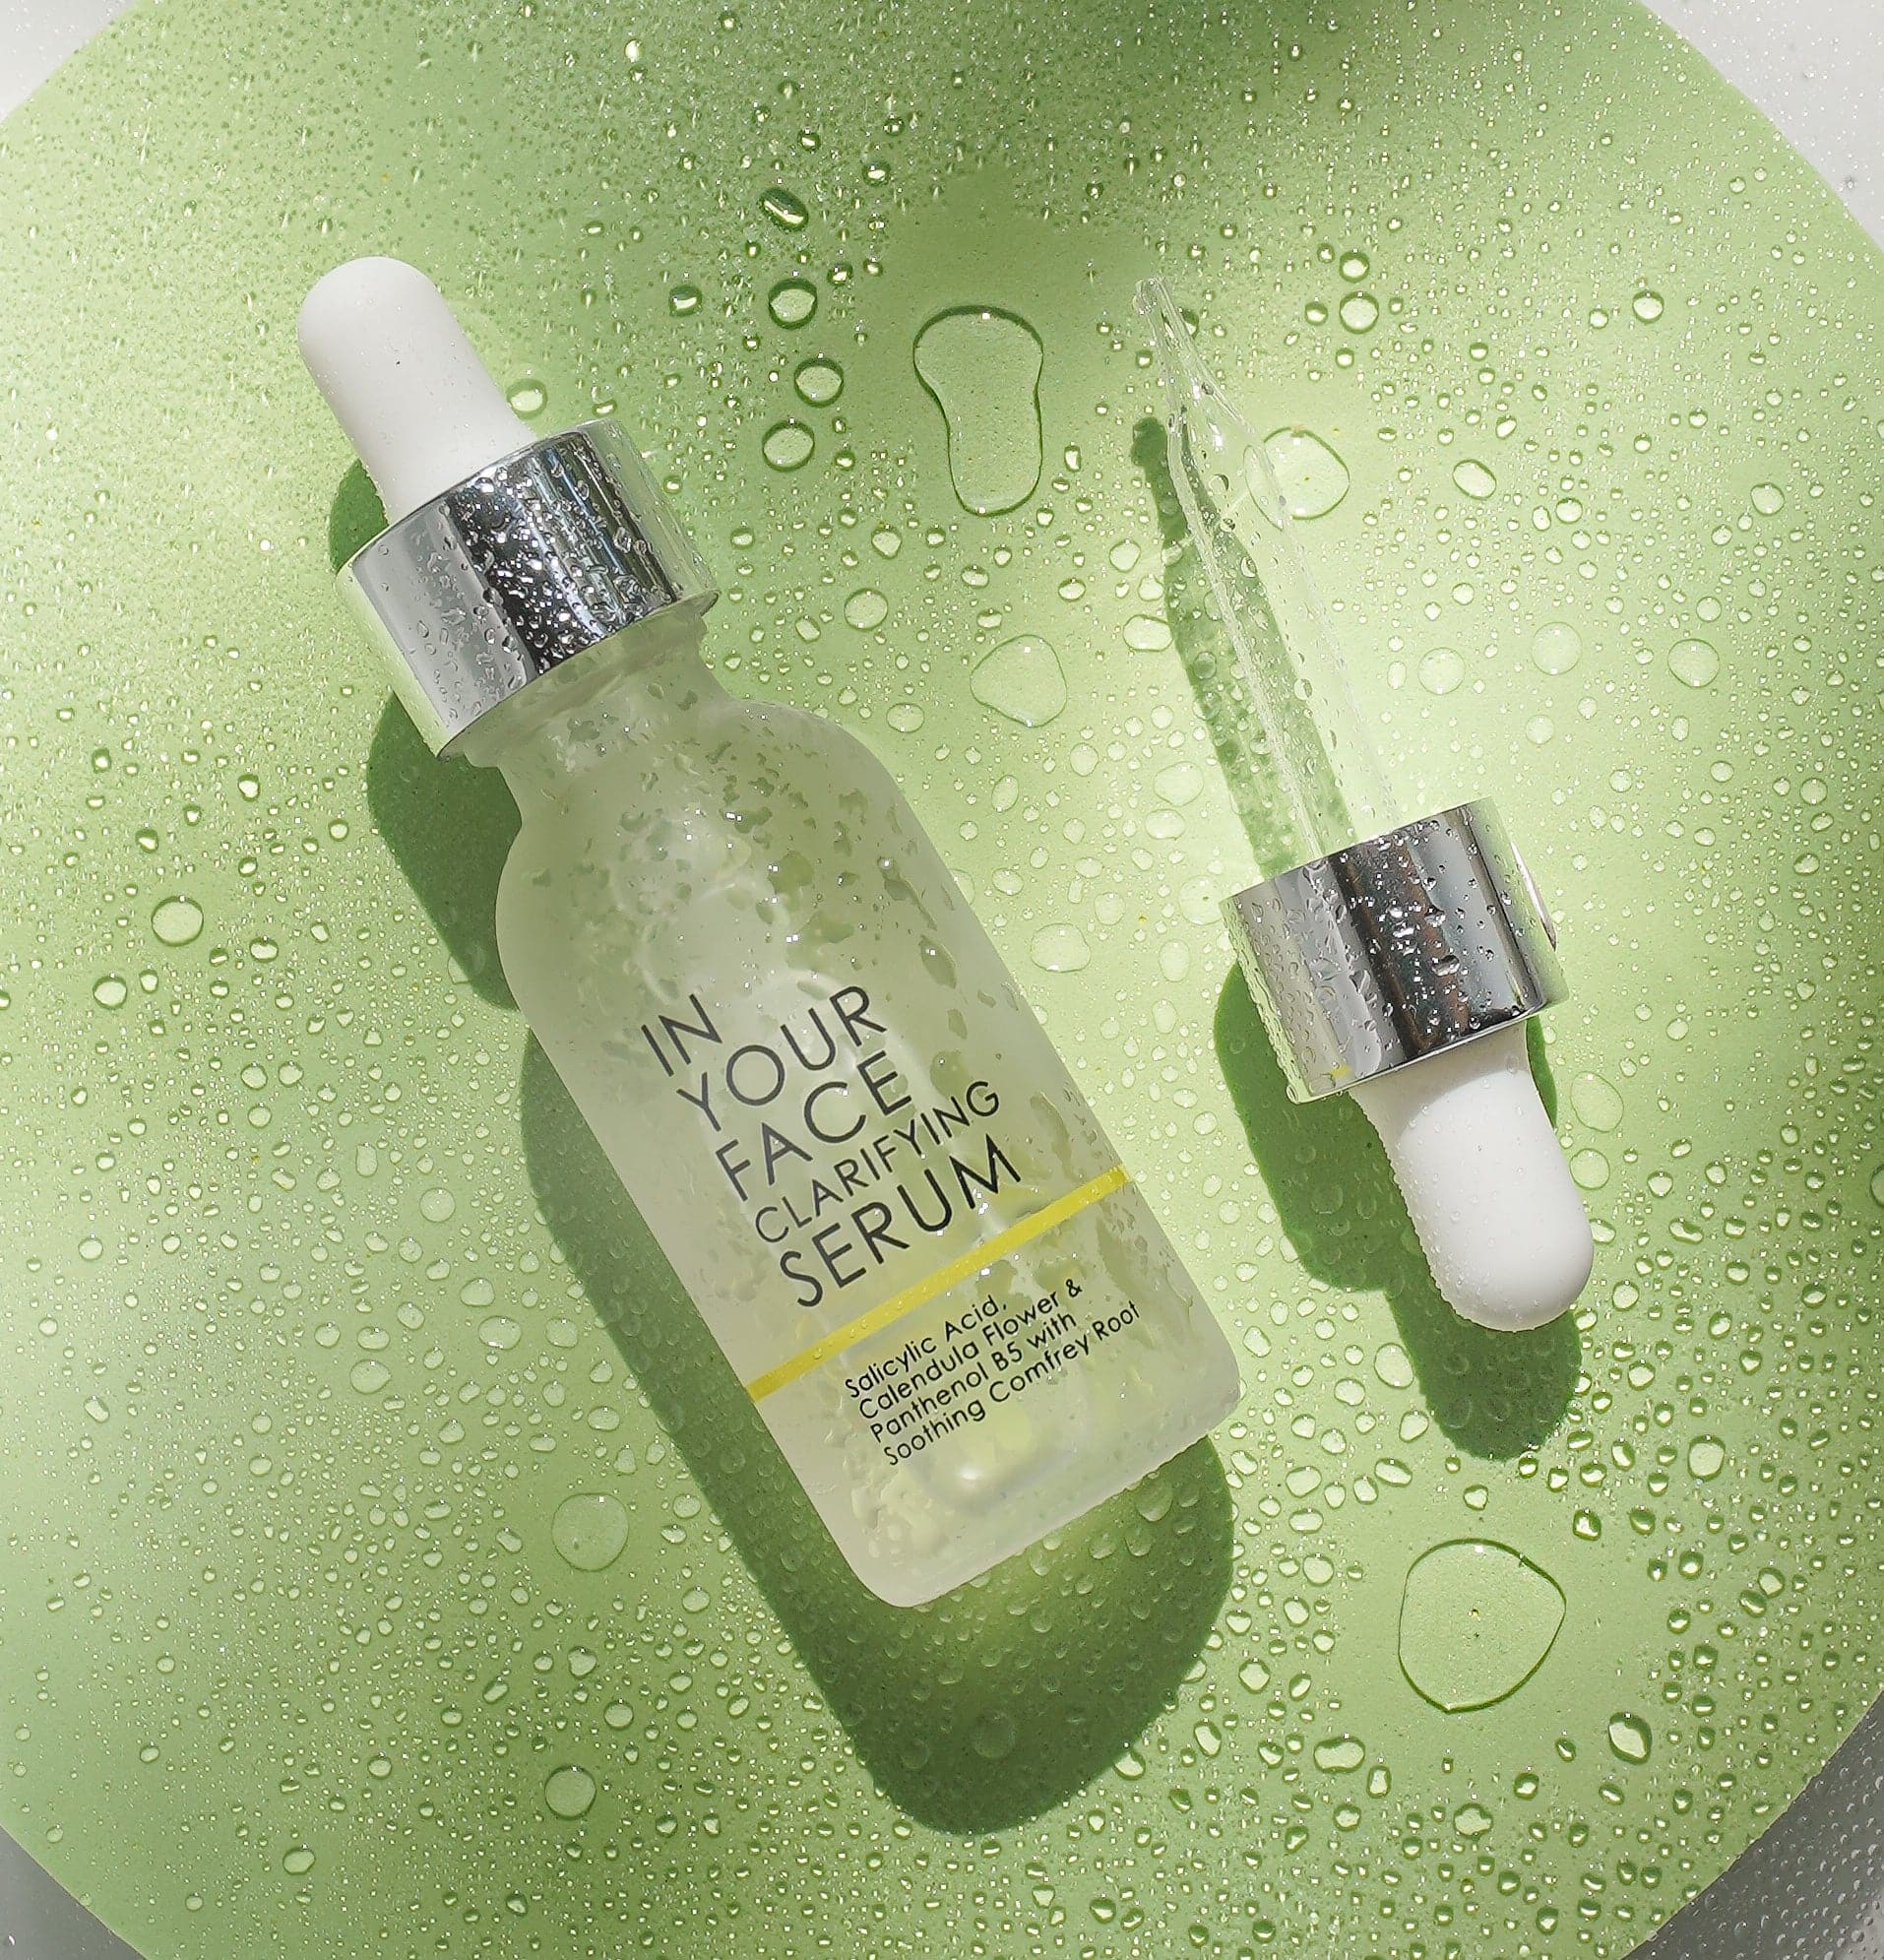 a bottle of the clarifying serum is laying on a dewy green surface, and next to it is a pipette.